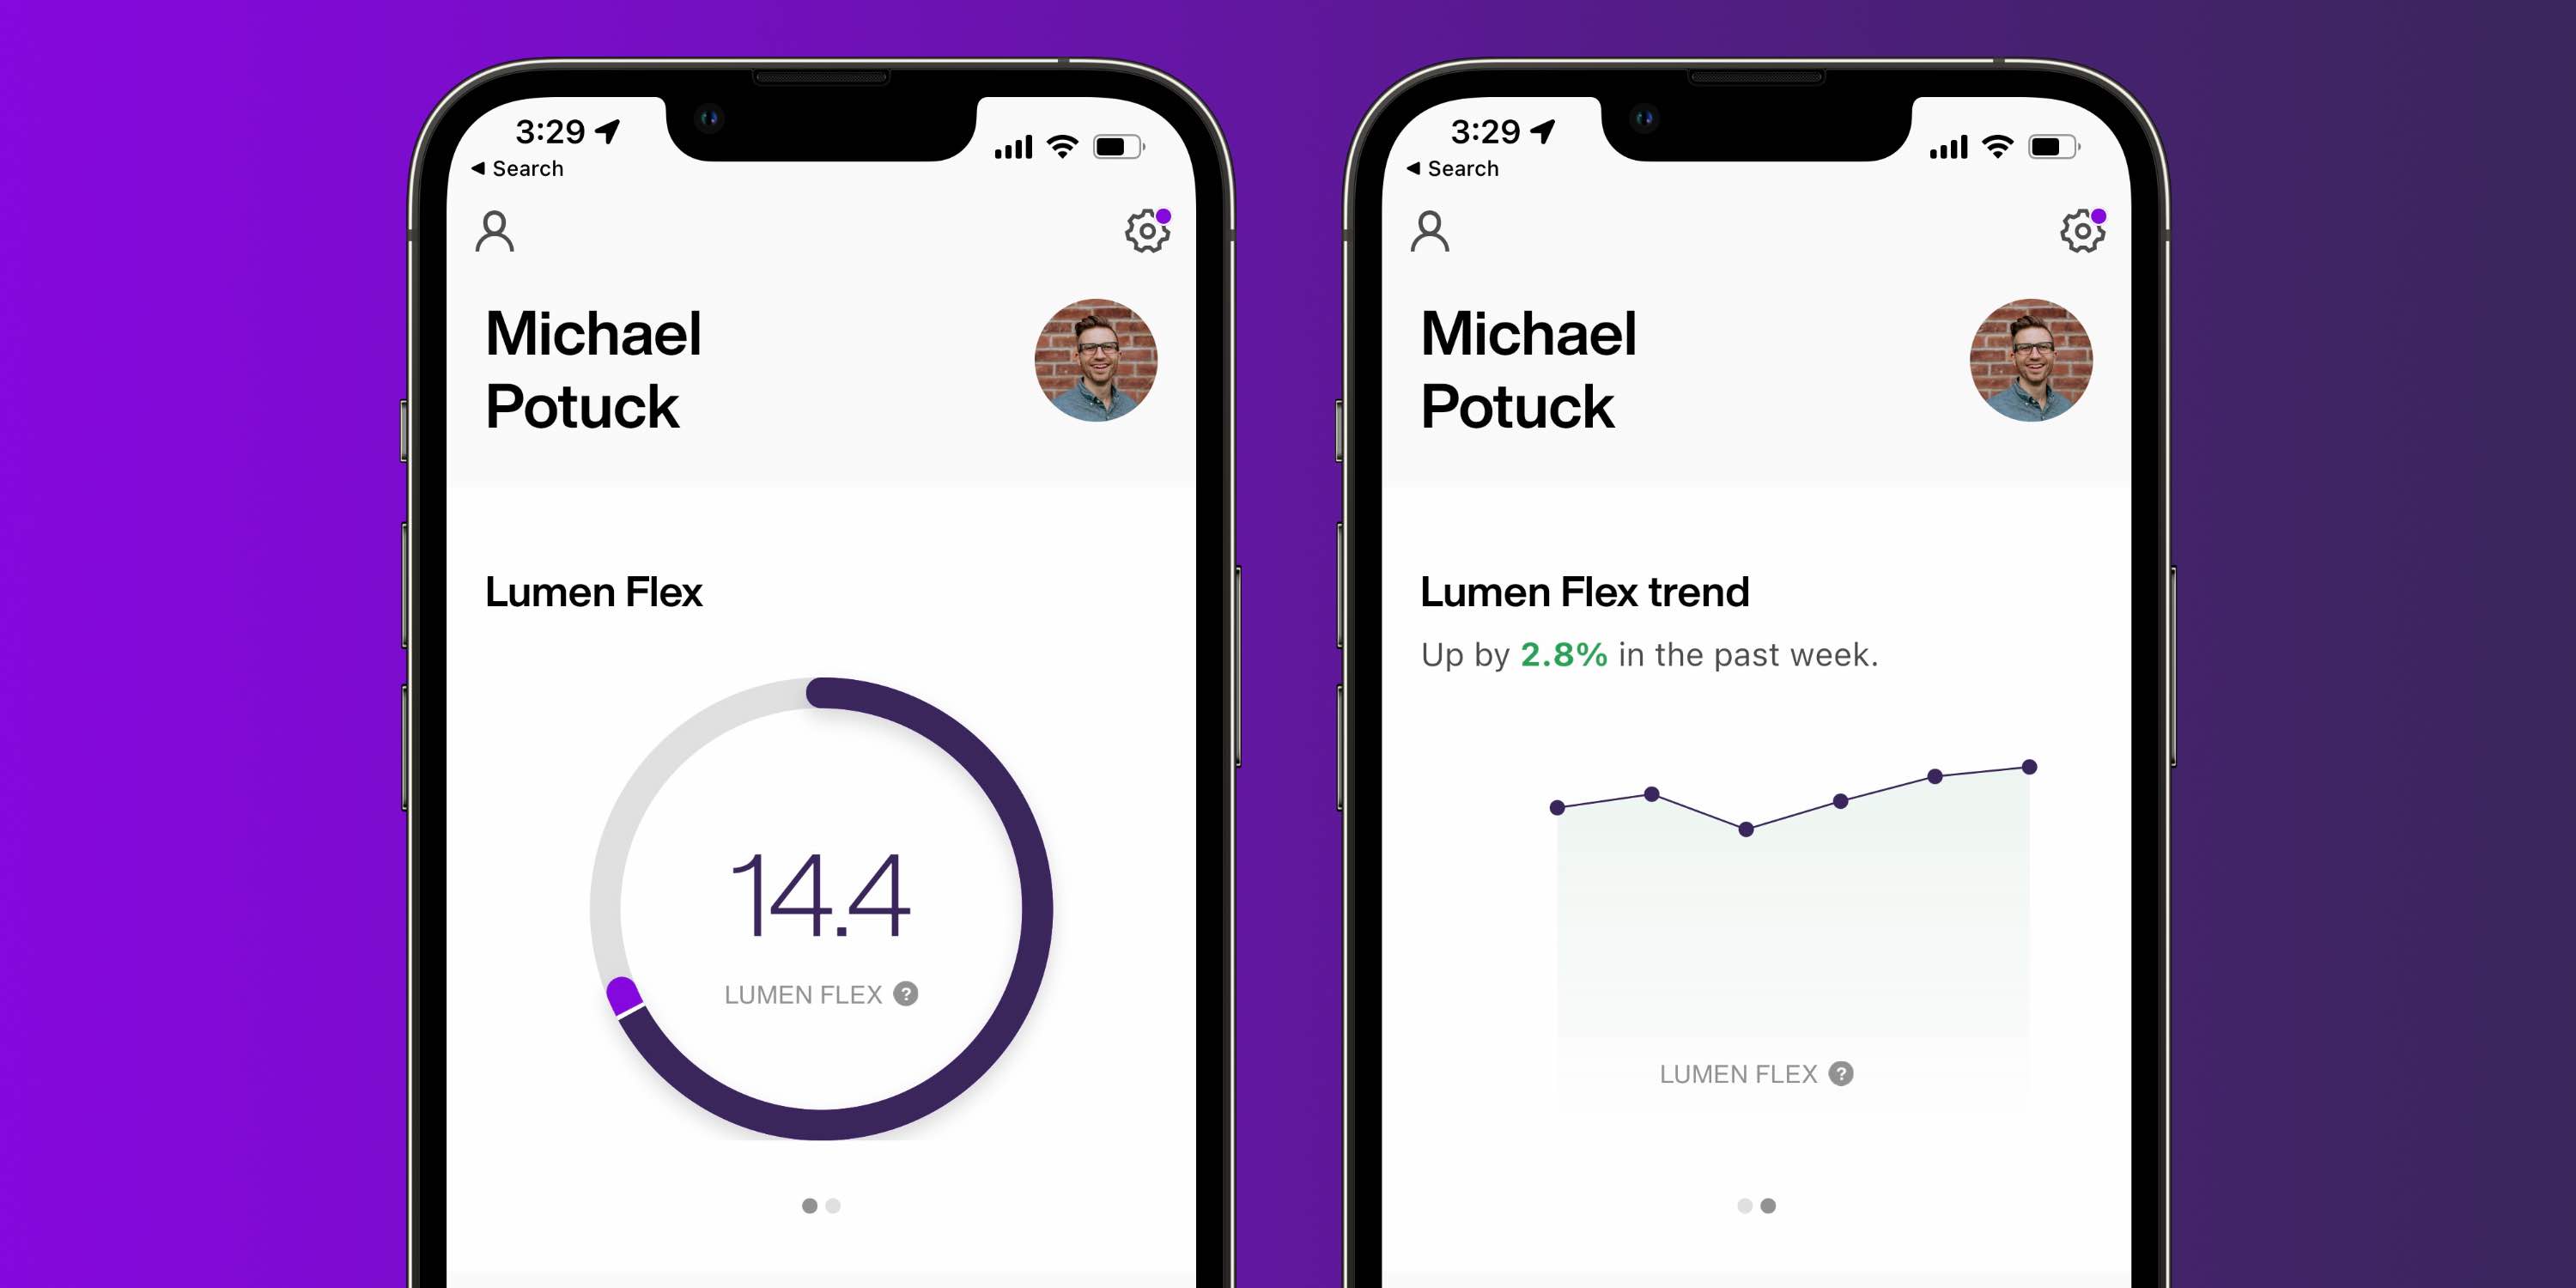 Making Progress with the Lumen Metabolism Tracker - The Healthy Slice